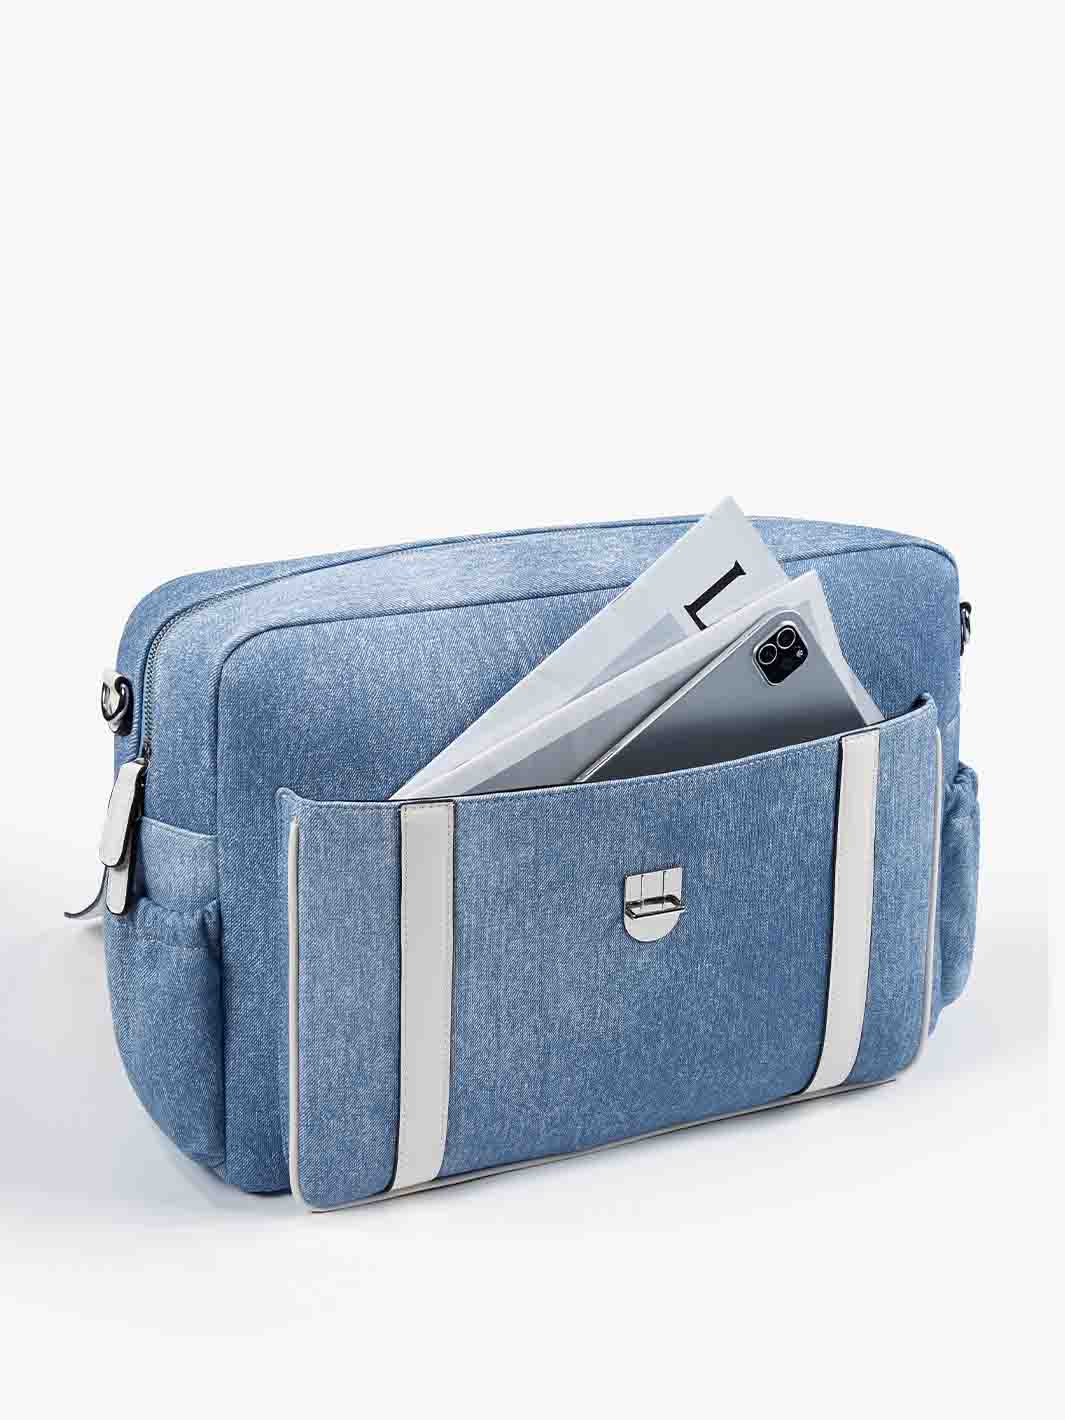 Leather Briefcase for Women with PU Fabric Denim-Inspired